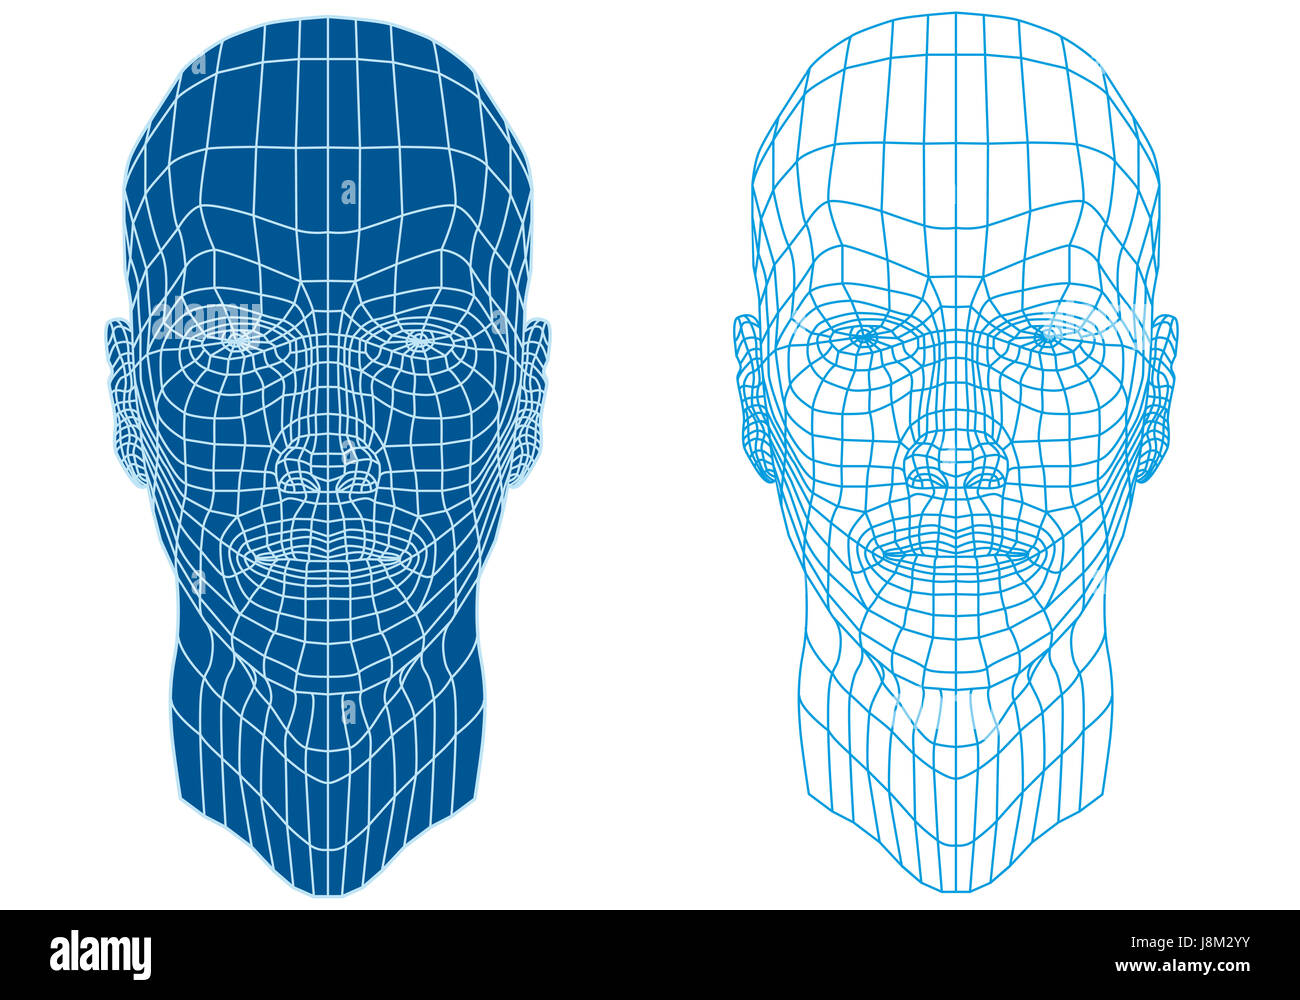 face, portrait, person, wire, mesh, man, head, blue, humans, human beings  Stock Photo - Alamy